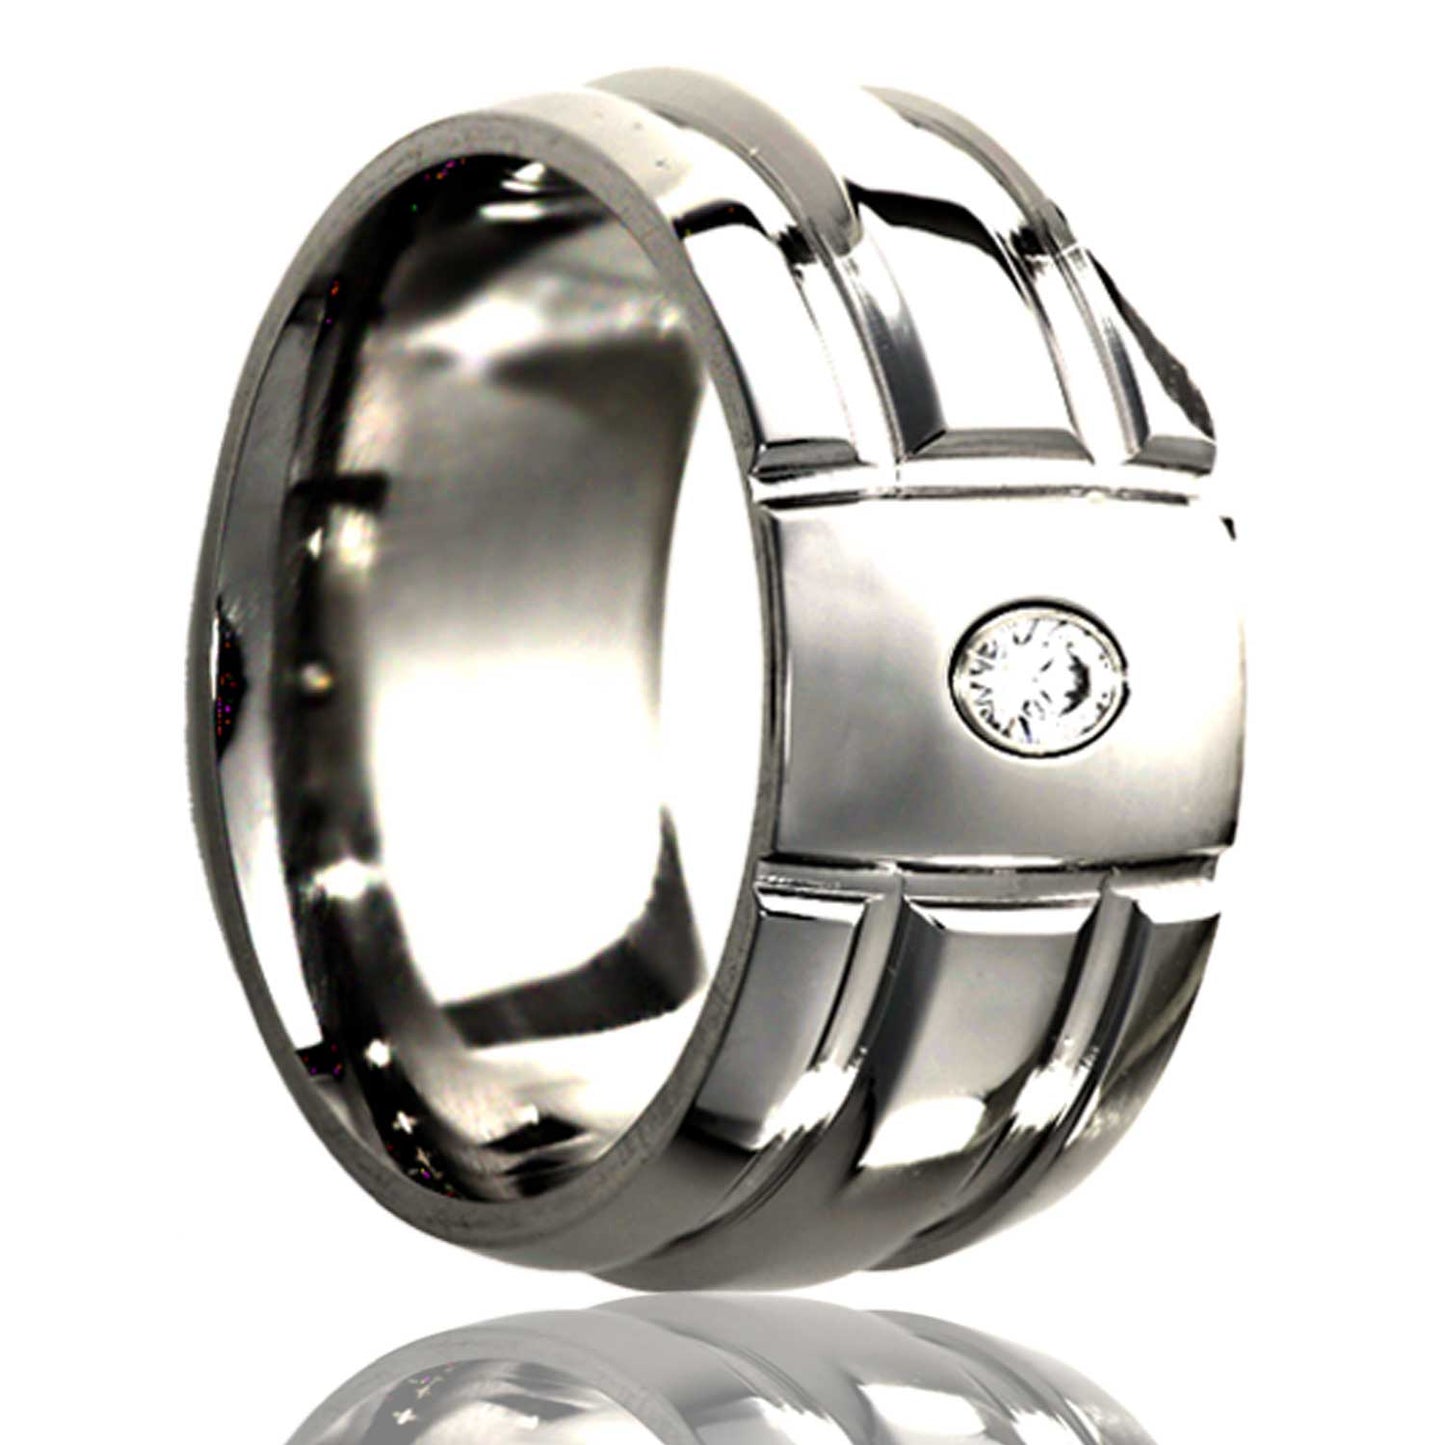 A grooved domed titanium men's wedding band with diamond displayed on a neutral white background.